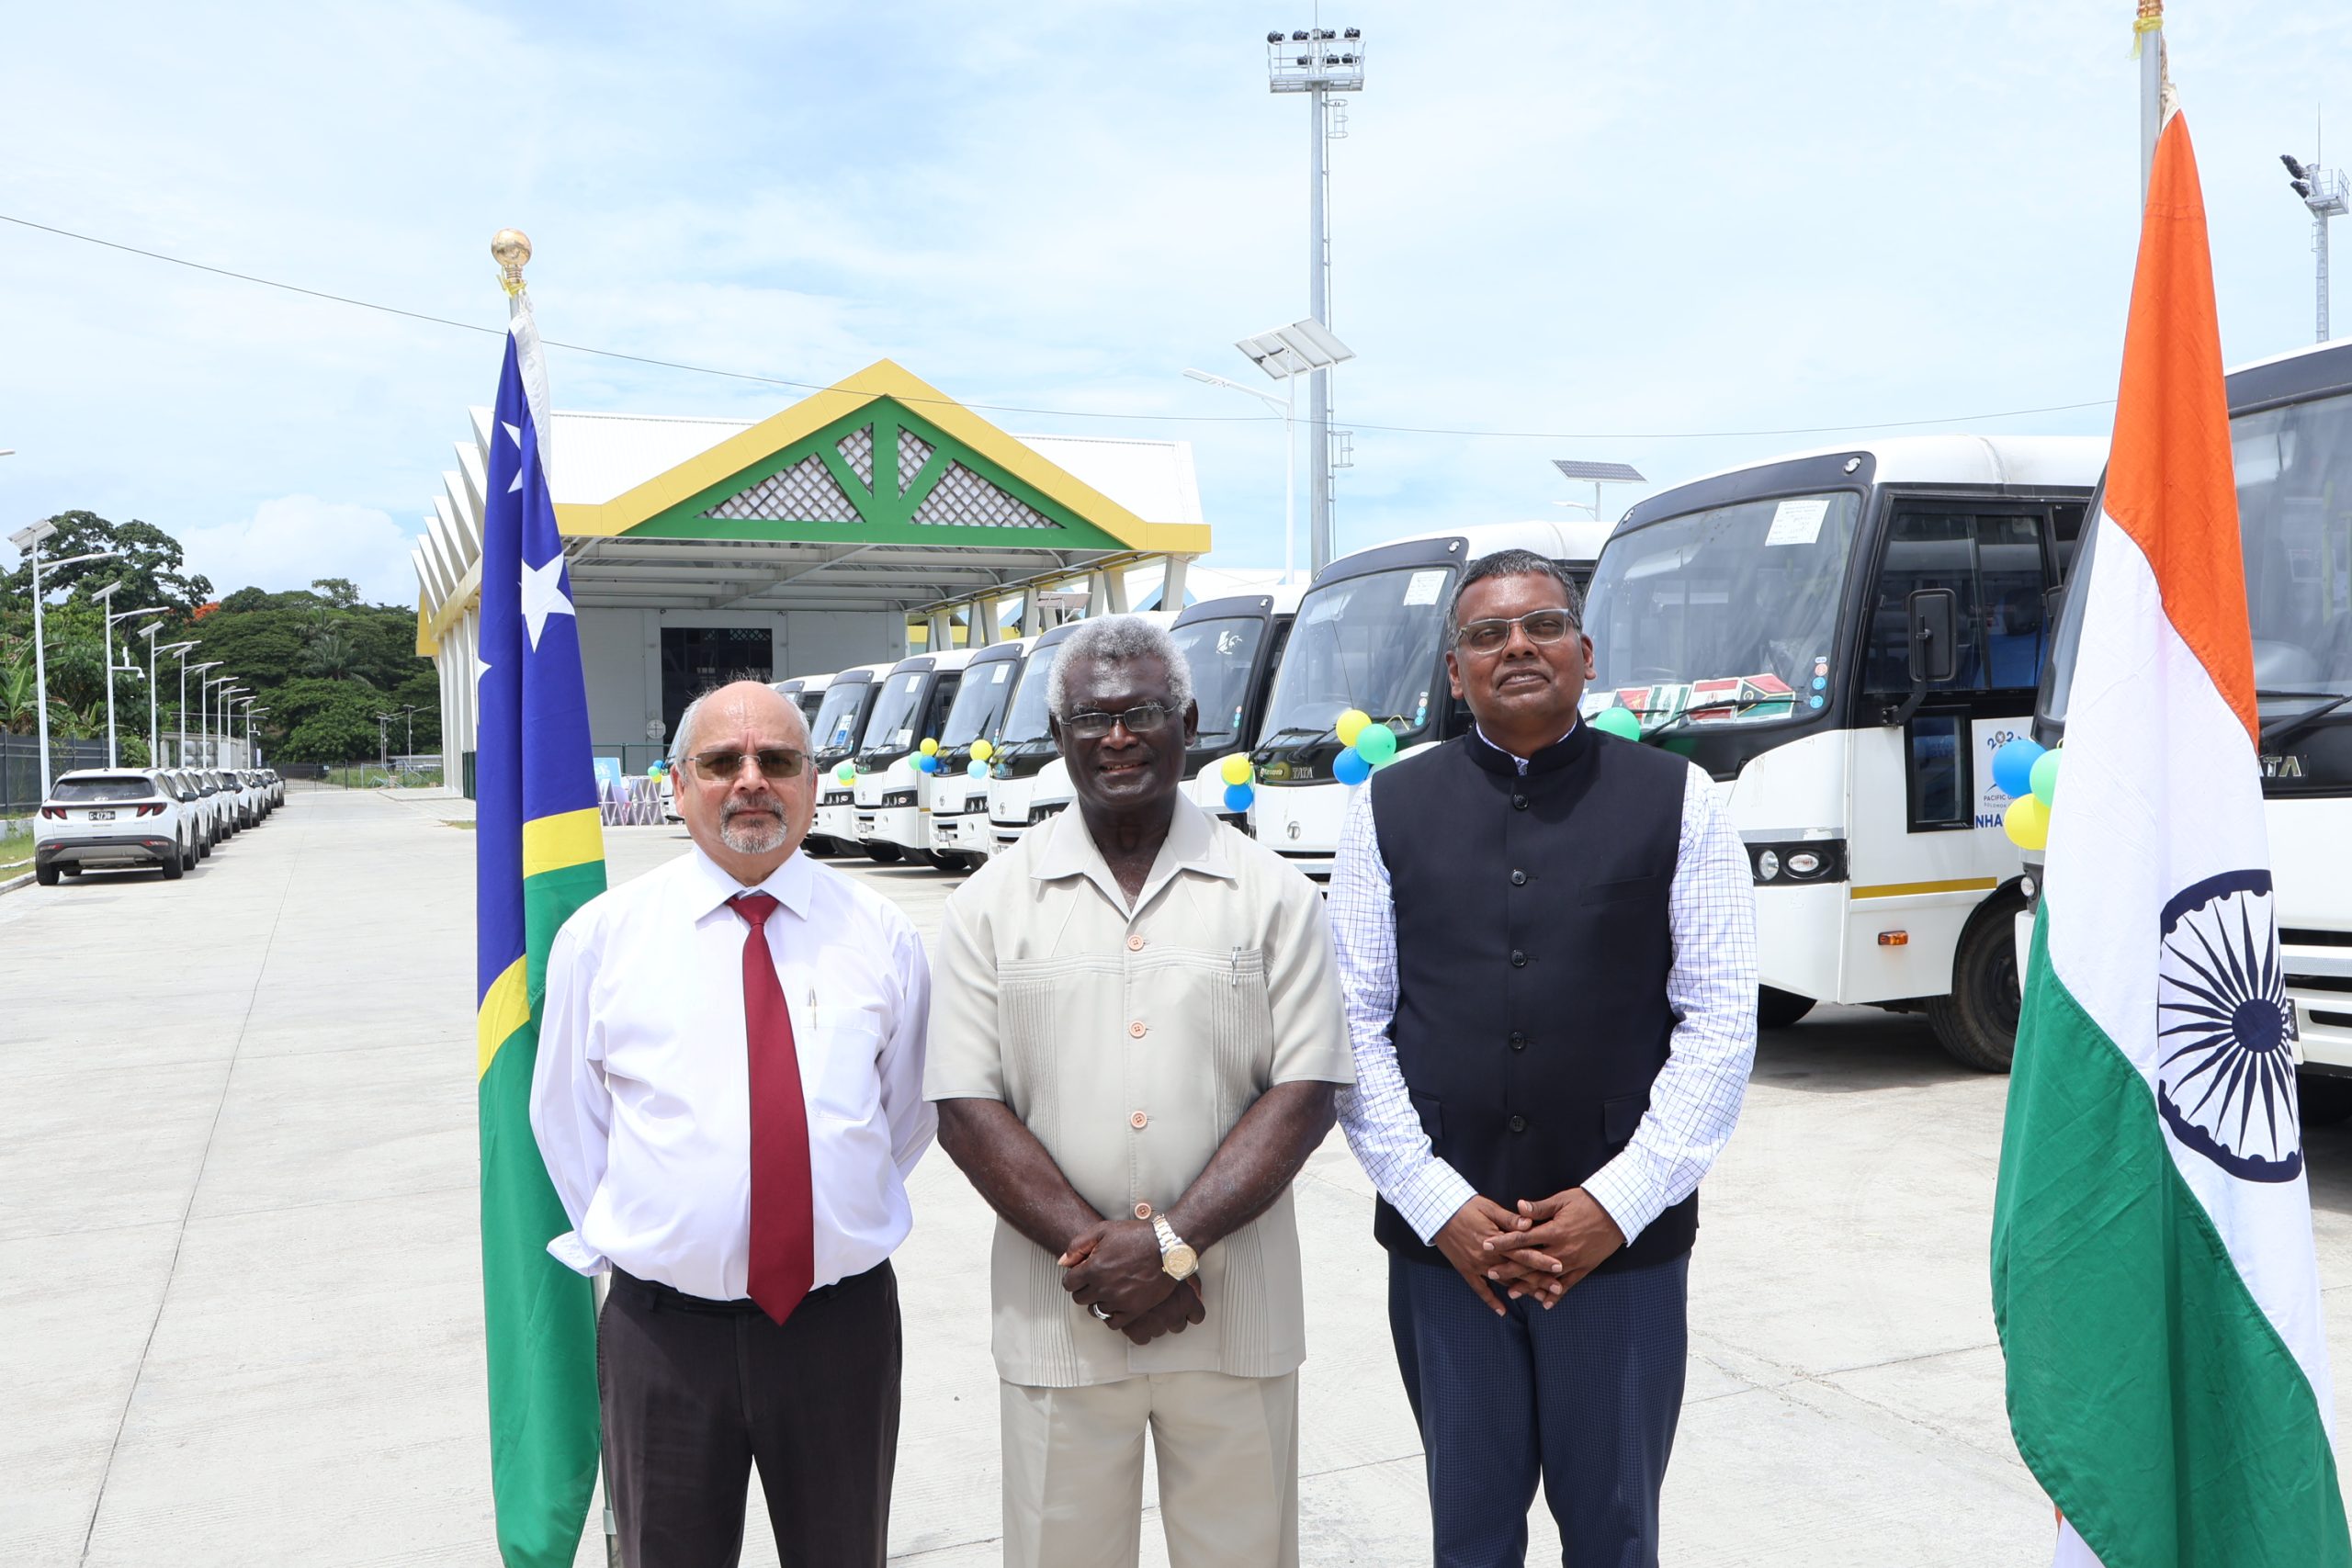 PM SOGAVARE OFFICIALLY RECEIVED TATA BUSES FROM INDIAN GOVT